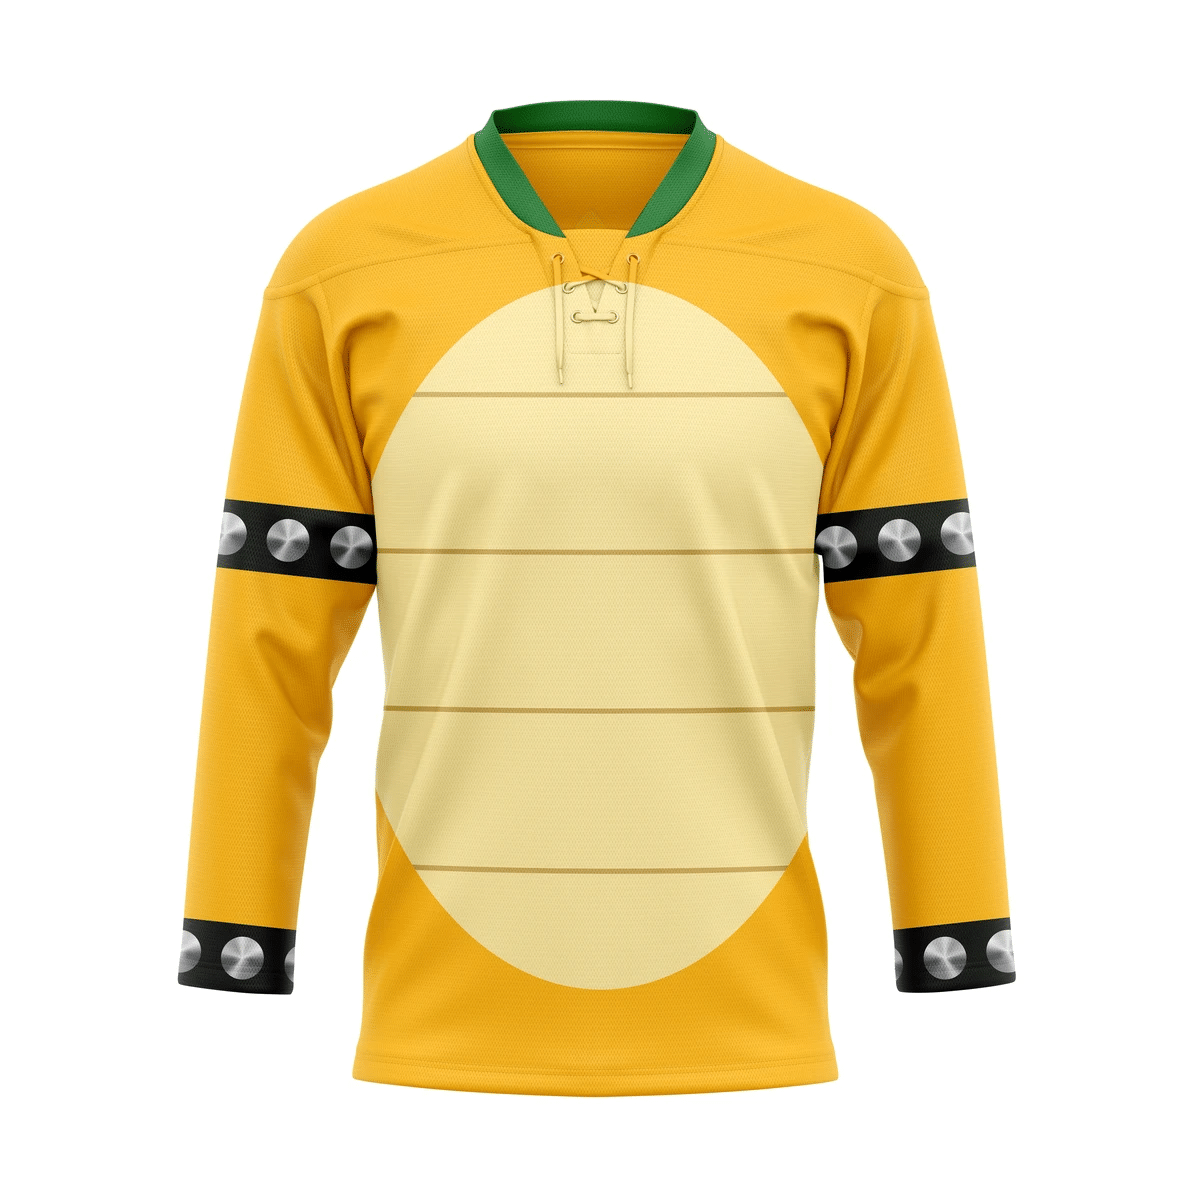 Check out our collection of unique and stylish hockey jerseys from all over the world 13